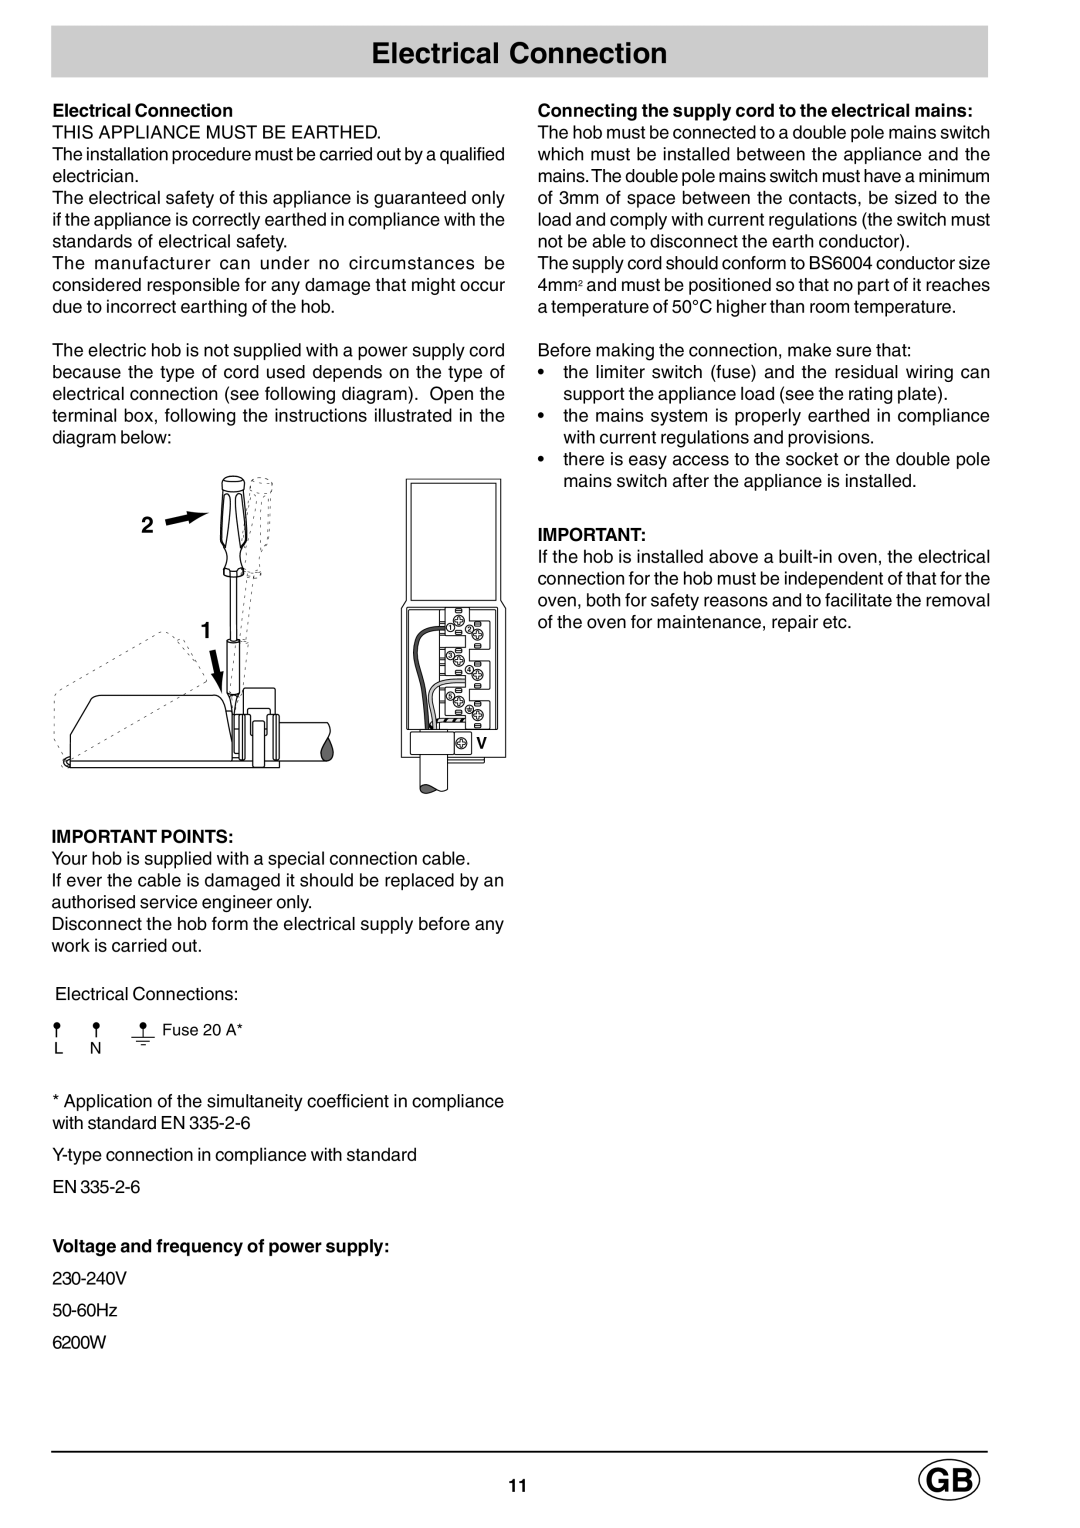 Hotpoint E6004 manual Electrical Connection, Important Points, Voltage and frequency of power supply 